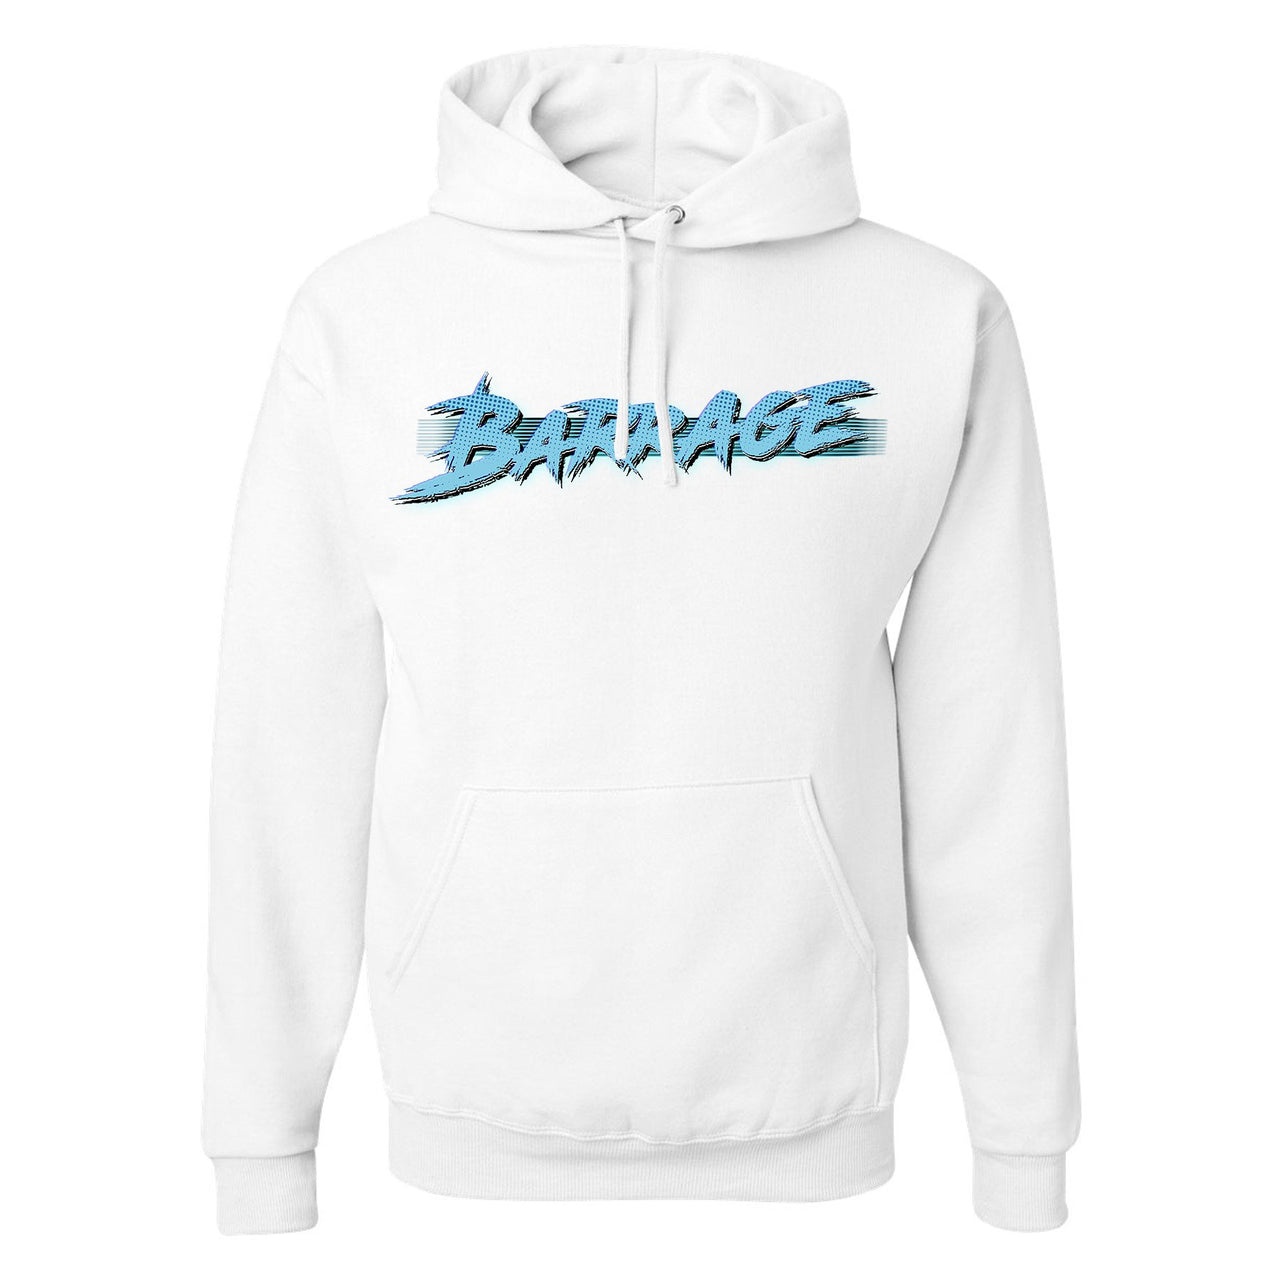 Cabana Mid Barrages Hoodie | Barrage, White